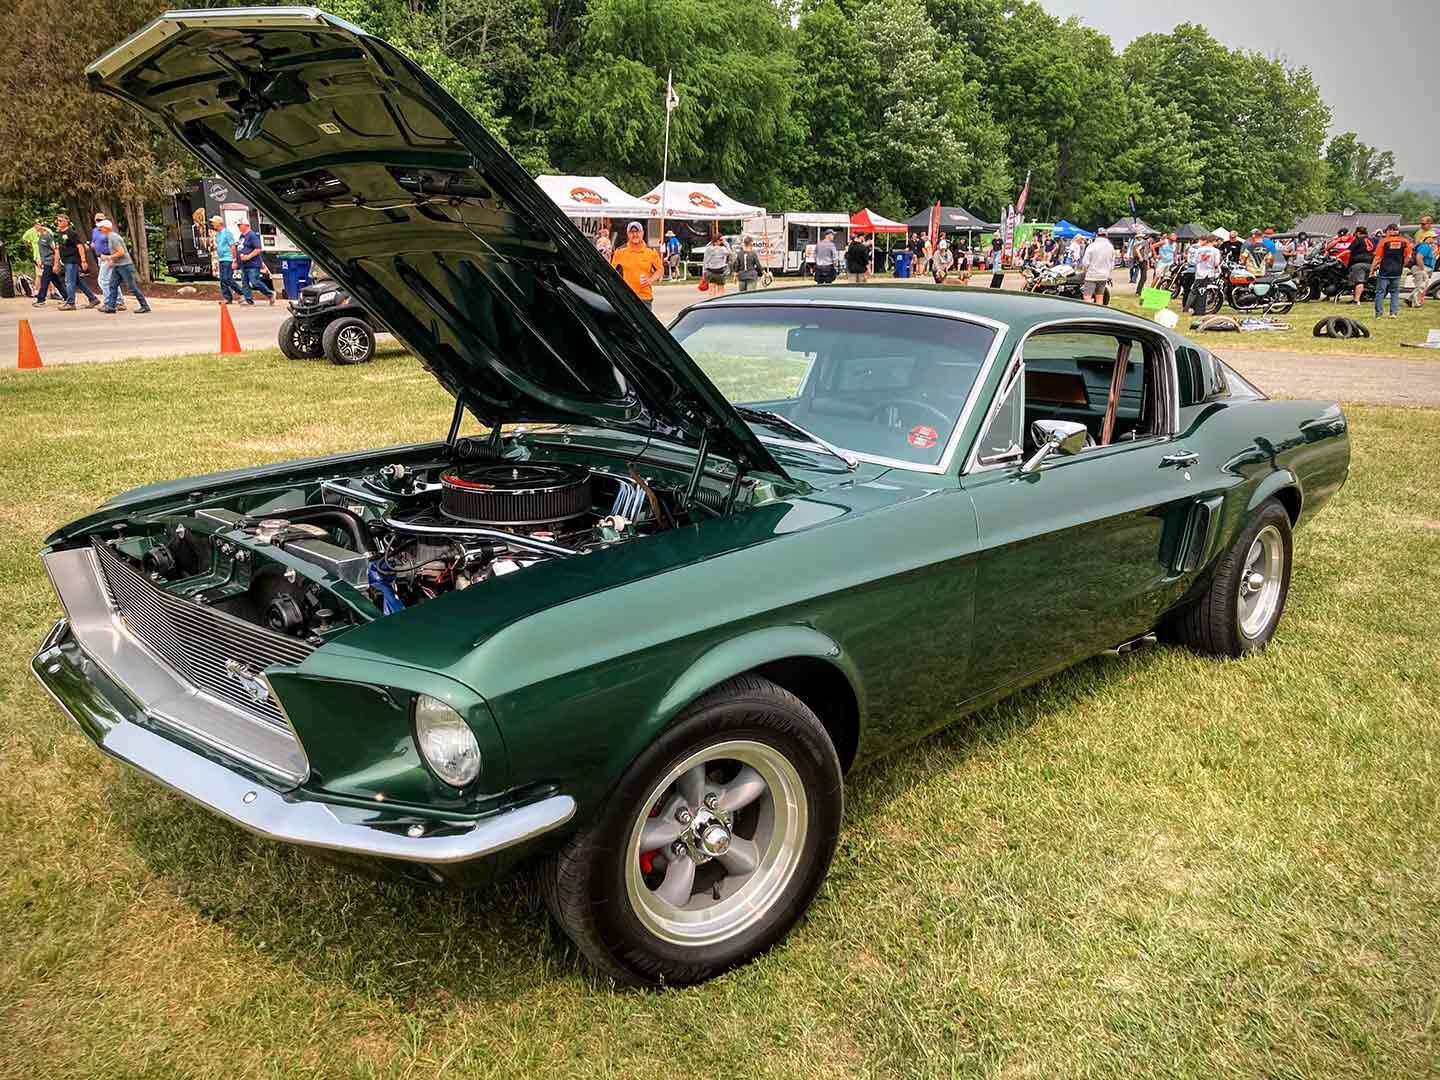 Some cages make the cut at Road America: 1967 (or 1968) Ford Mustang Fastback.